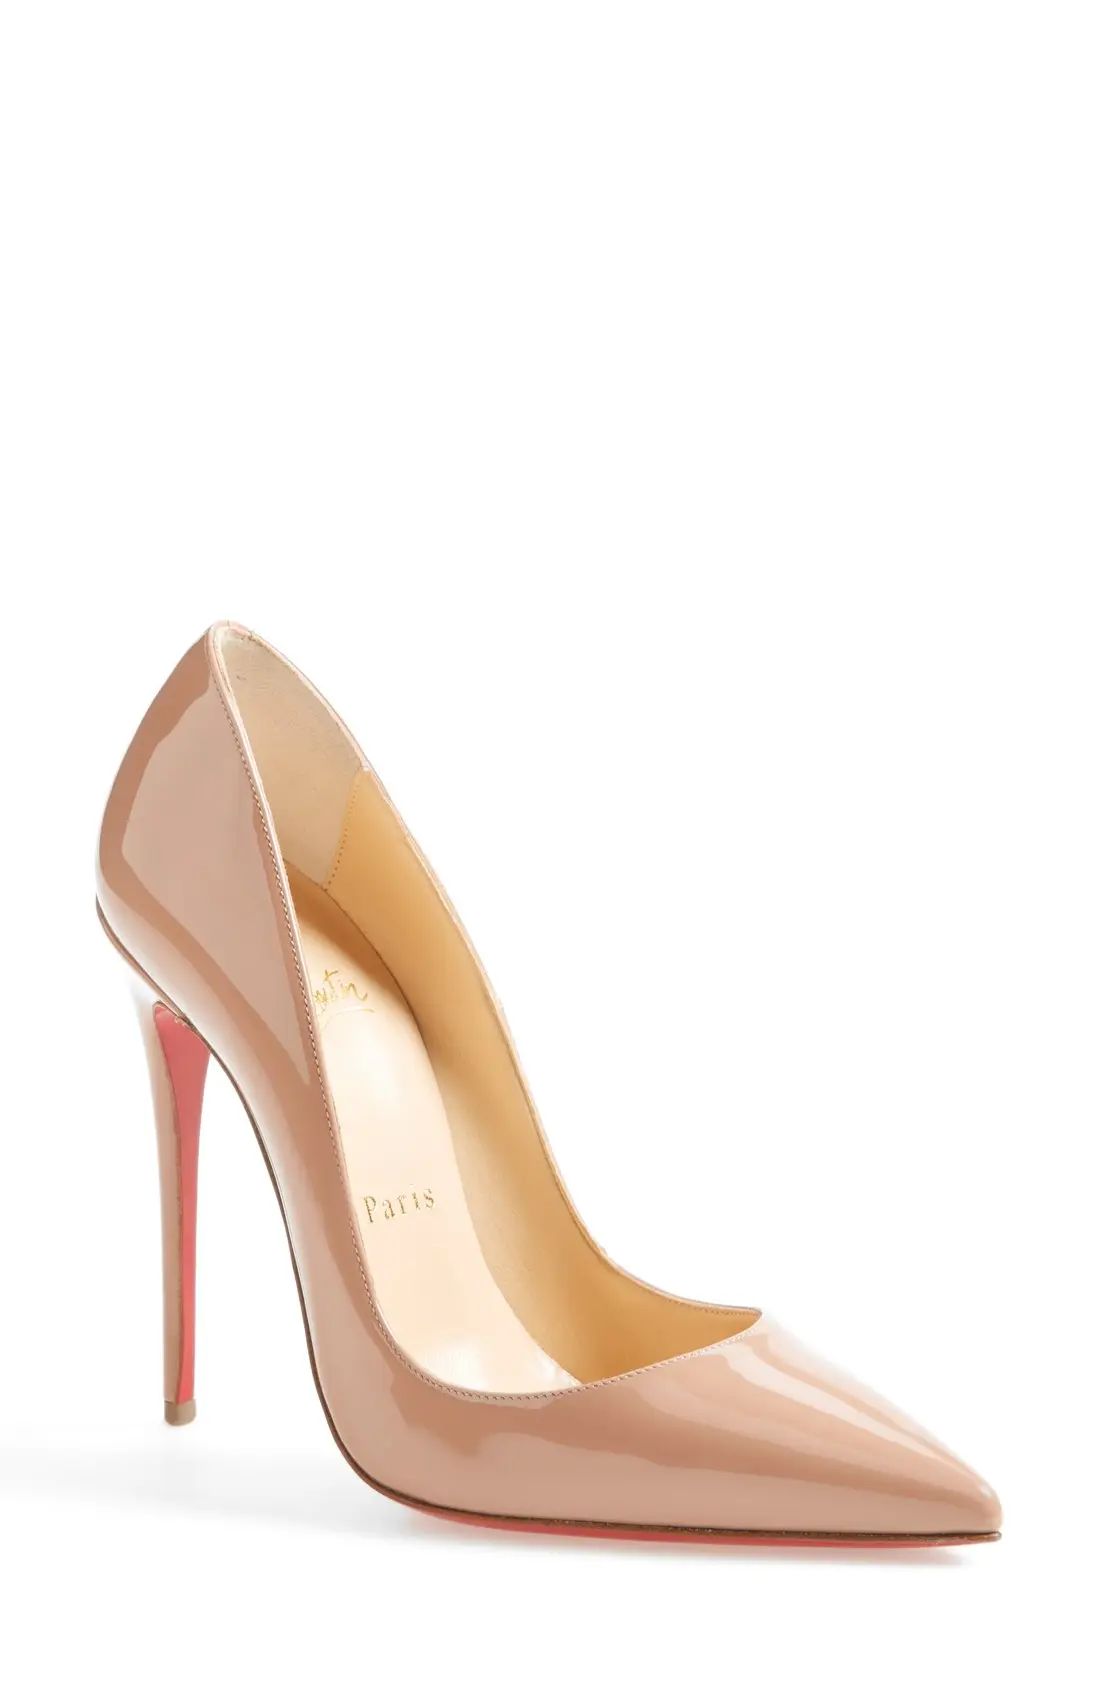 Women's Christian Louboutin So Kate Pointed Toe Pump, Size 5US - Beige | Nordstrom